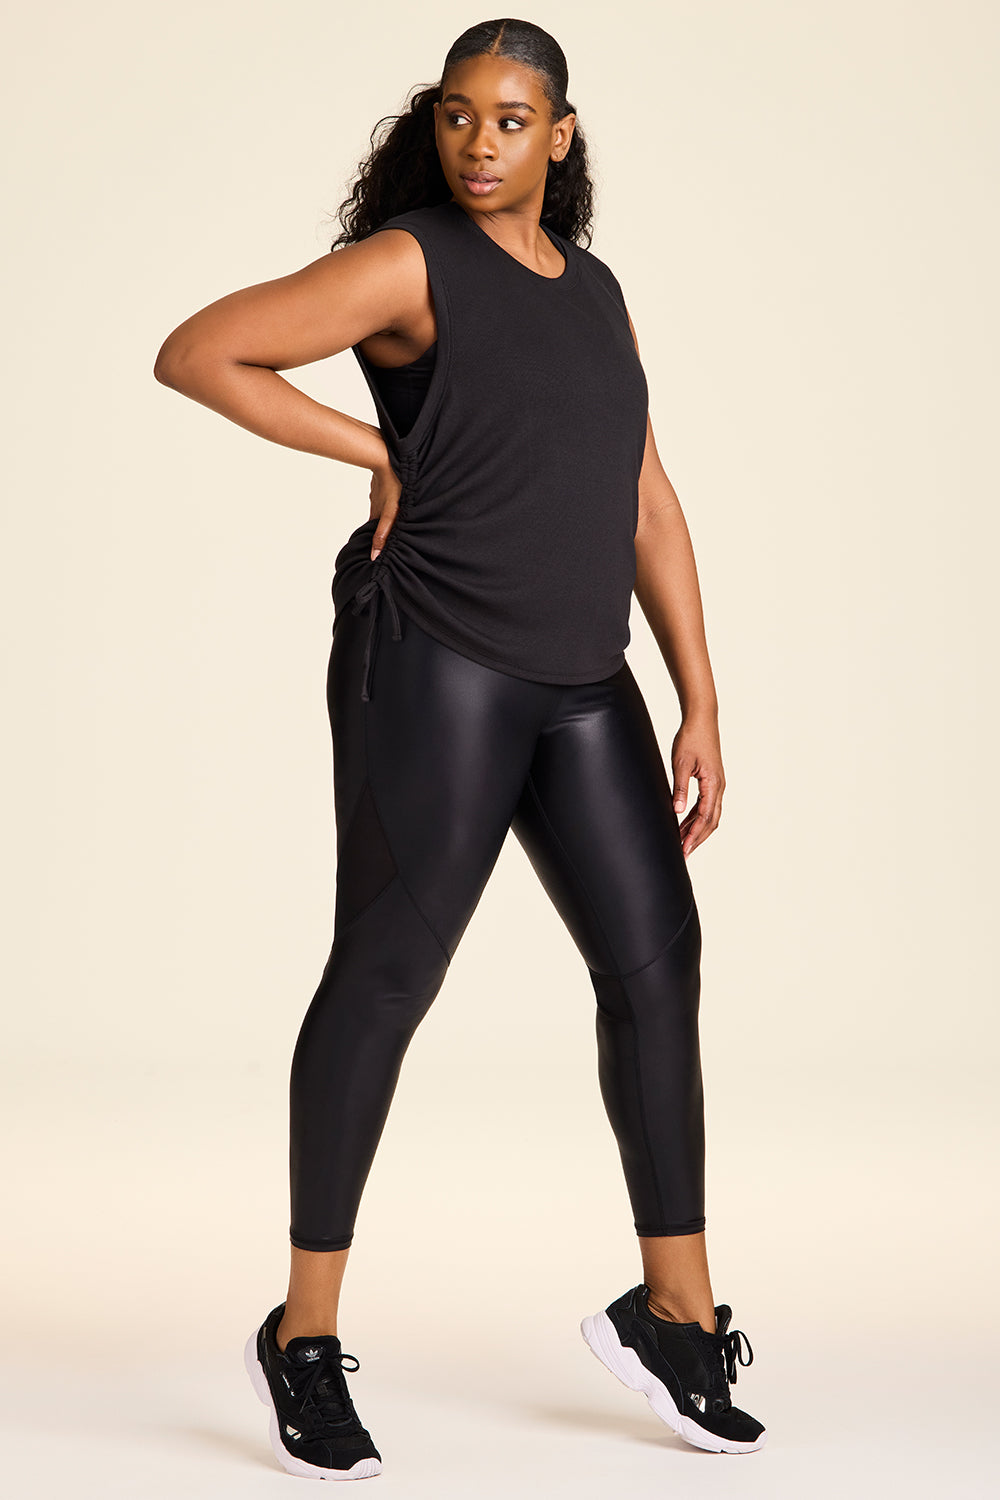 Black muscle tank for women from Alala activewear